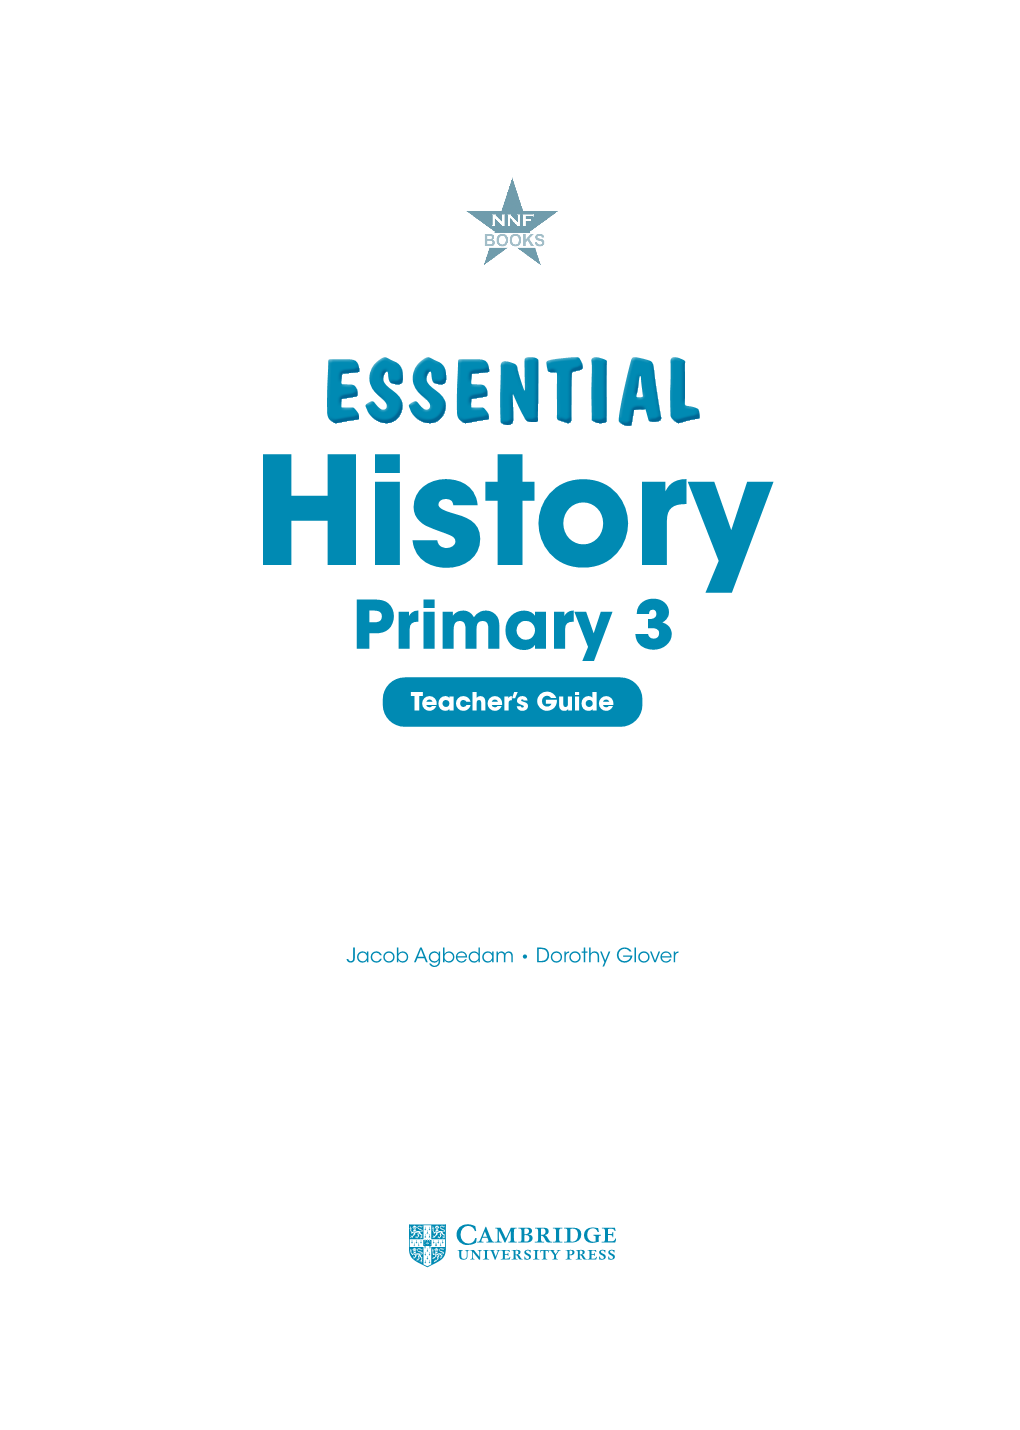 Essential History Primary 3 Teacher's Guide